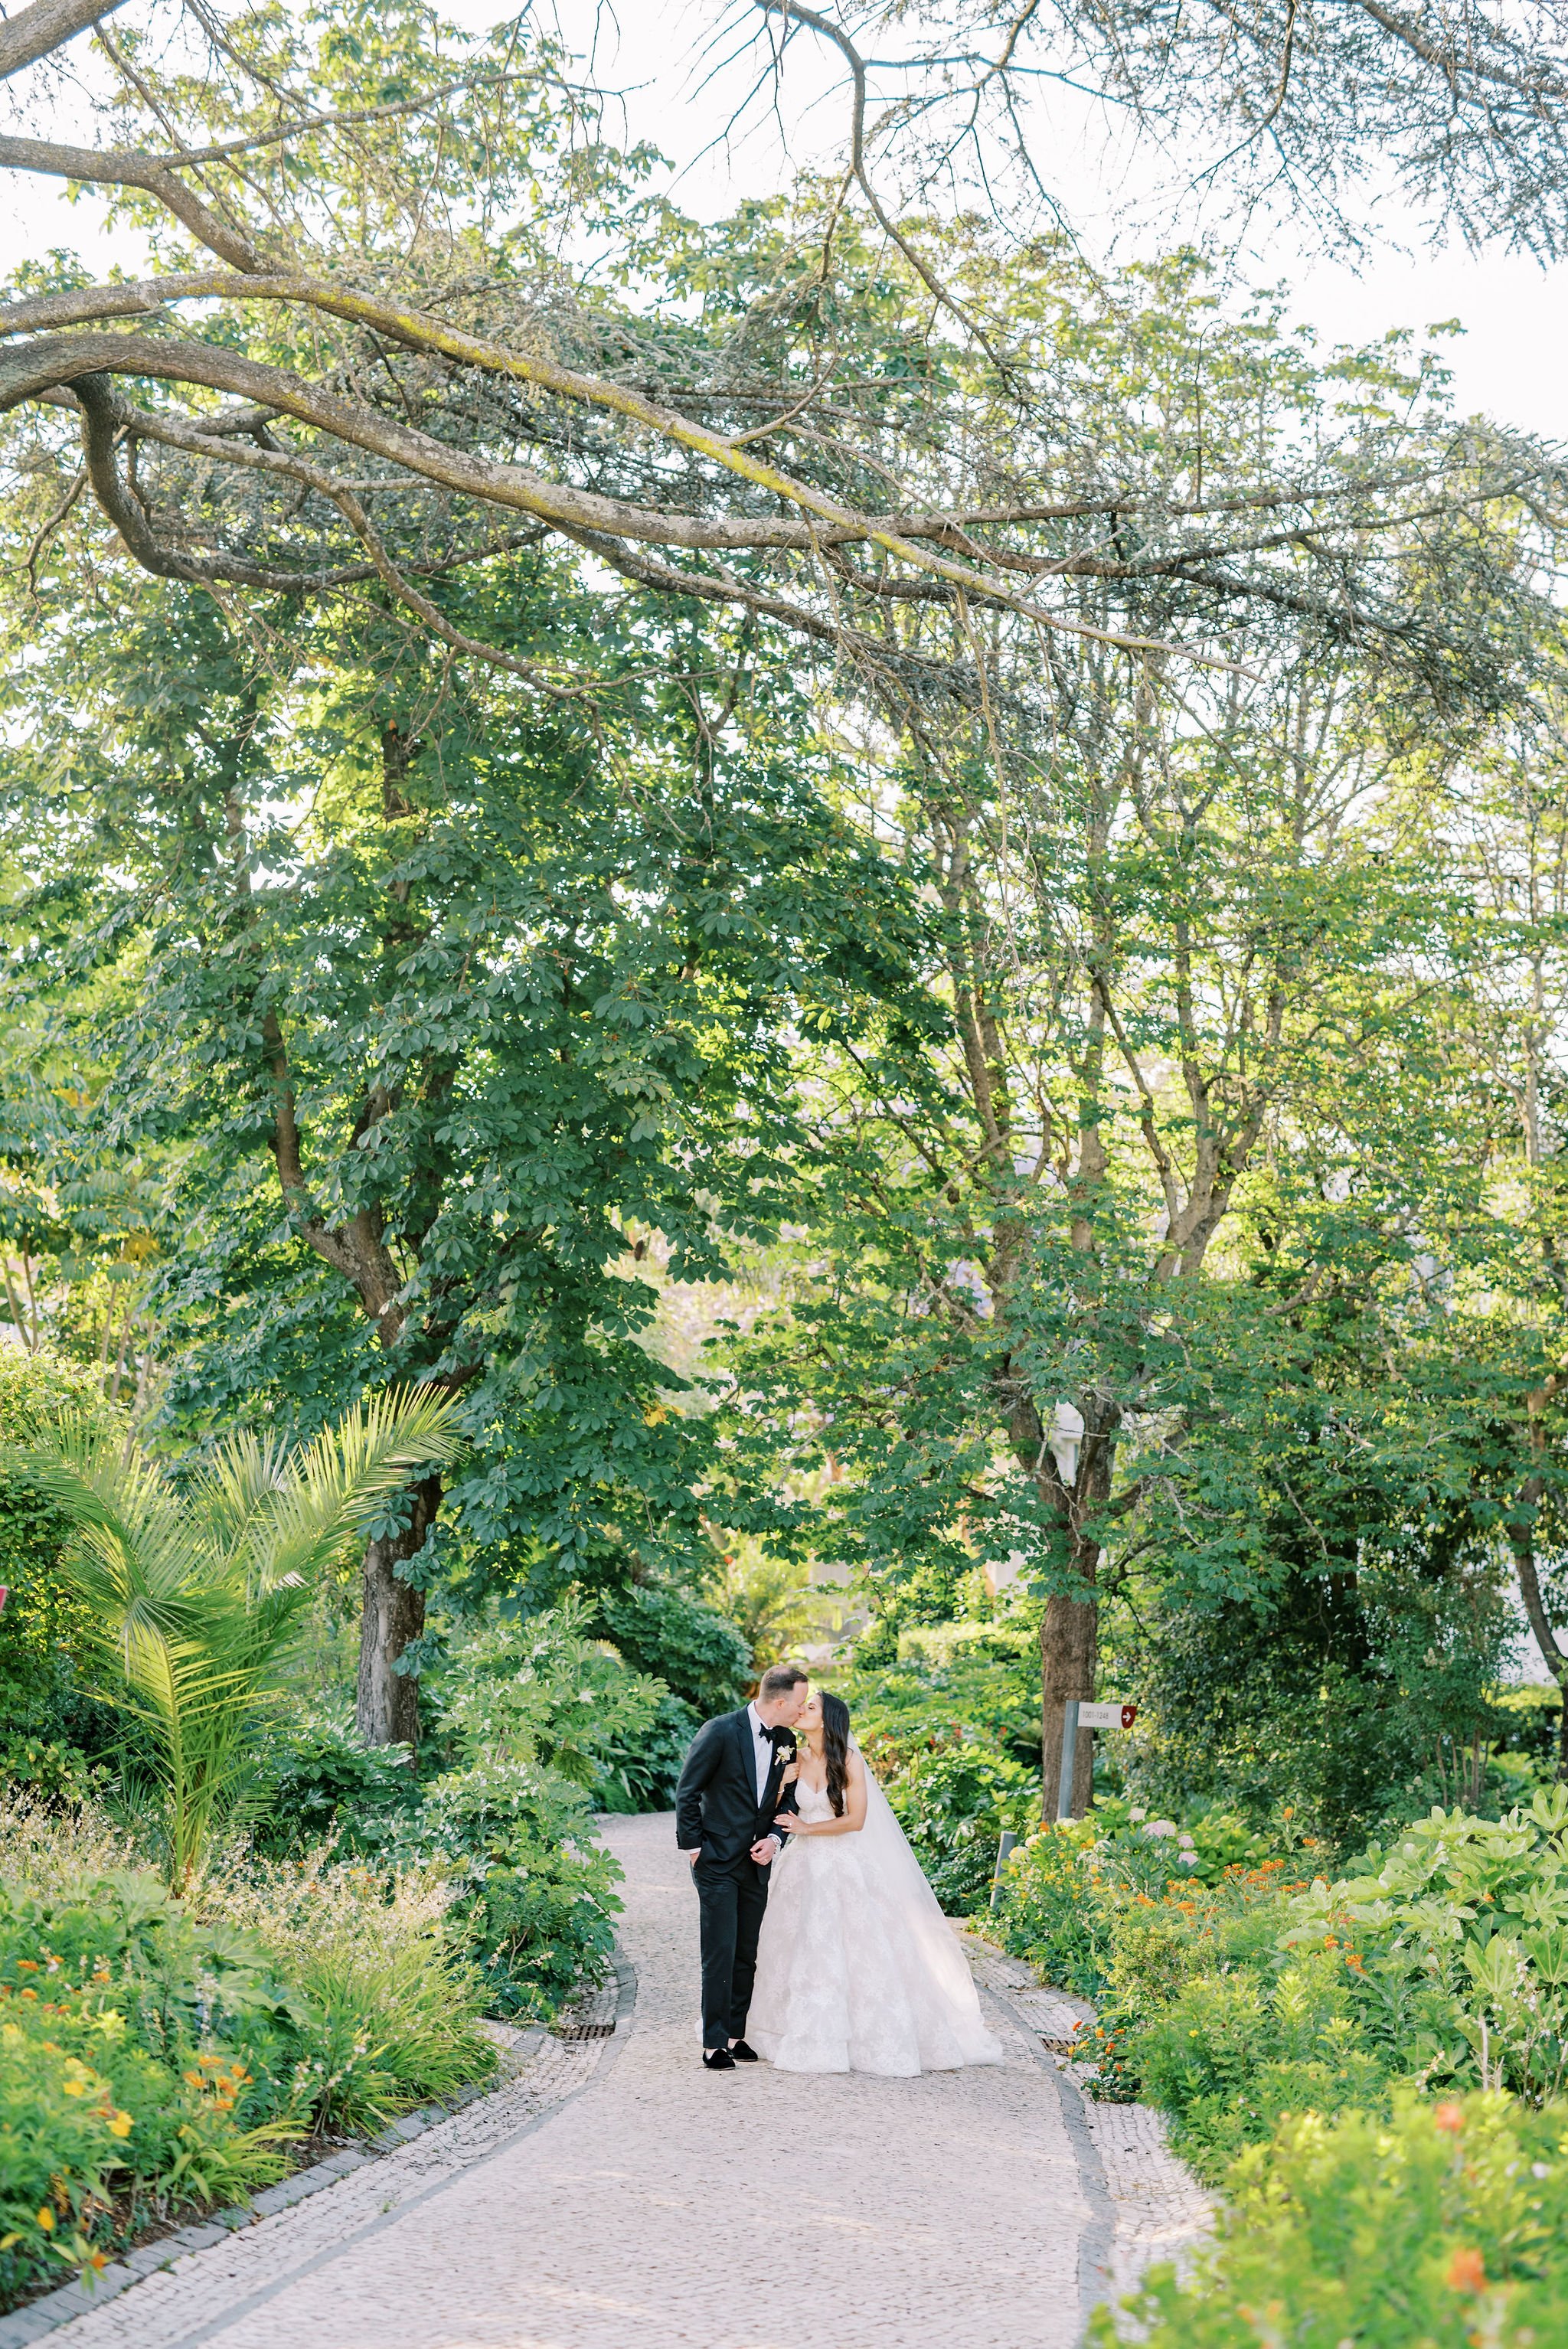 Bride and groom in the gardens of Pestana Palace Lisbon surrounded by trees